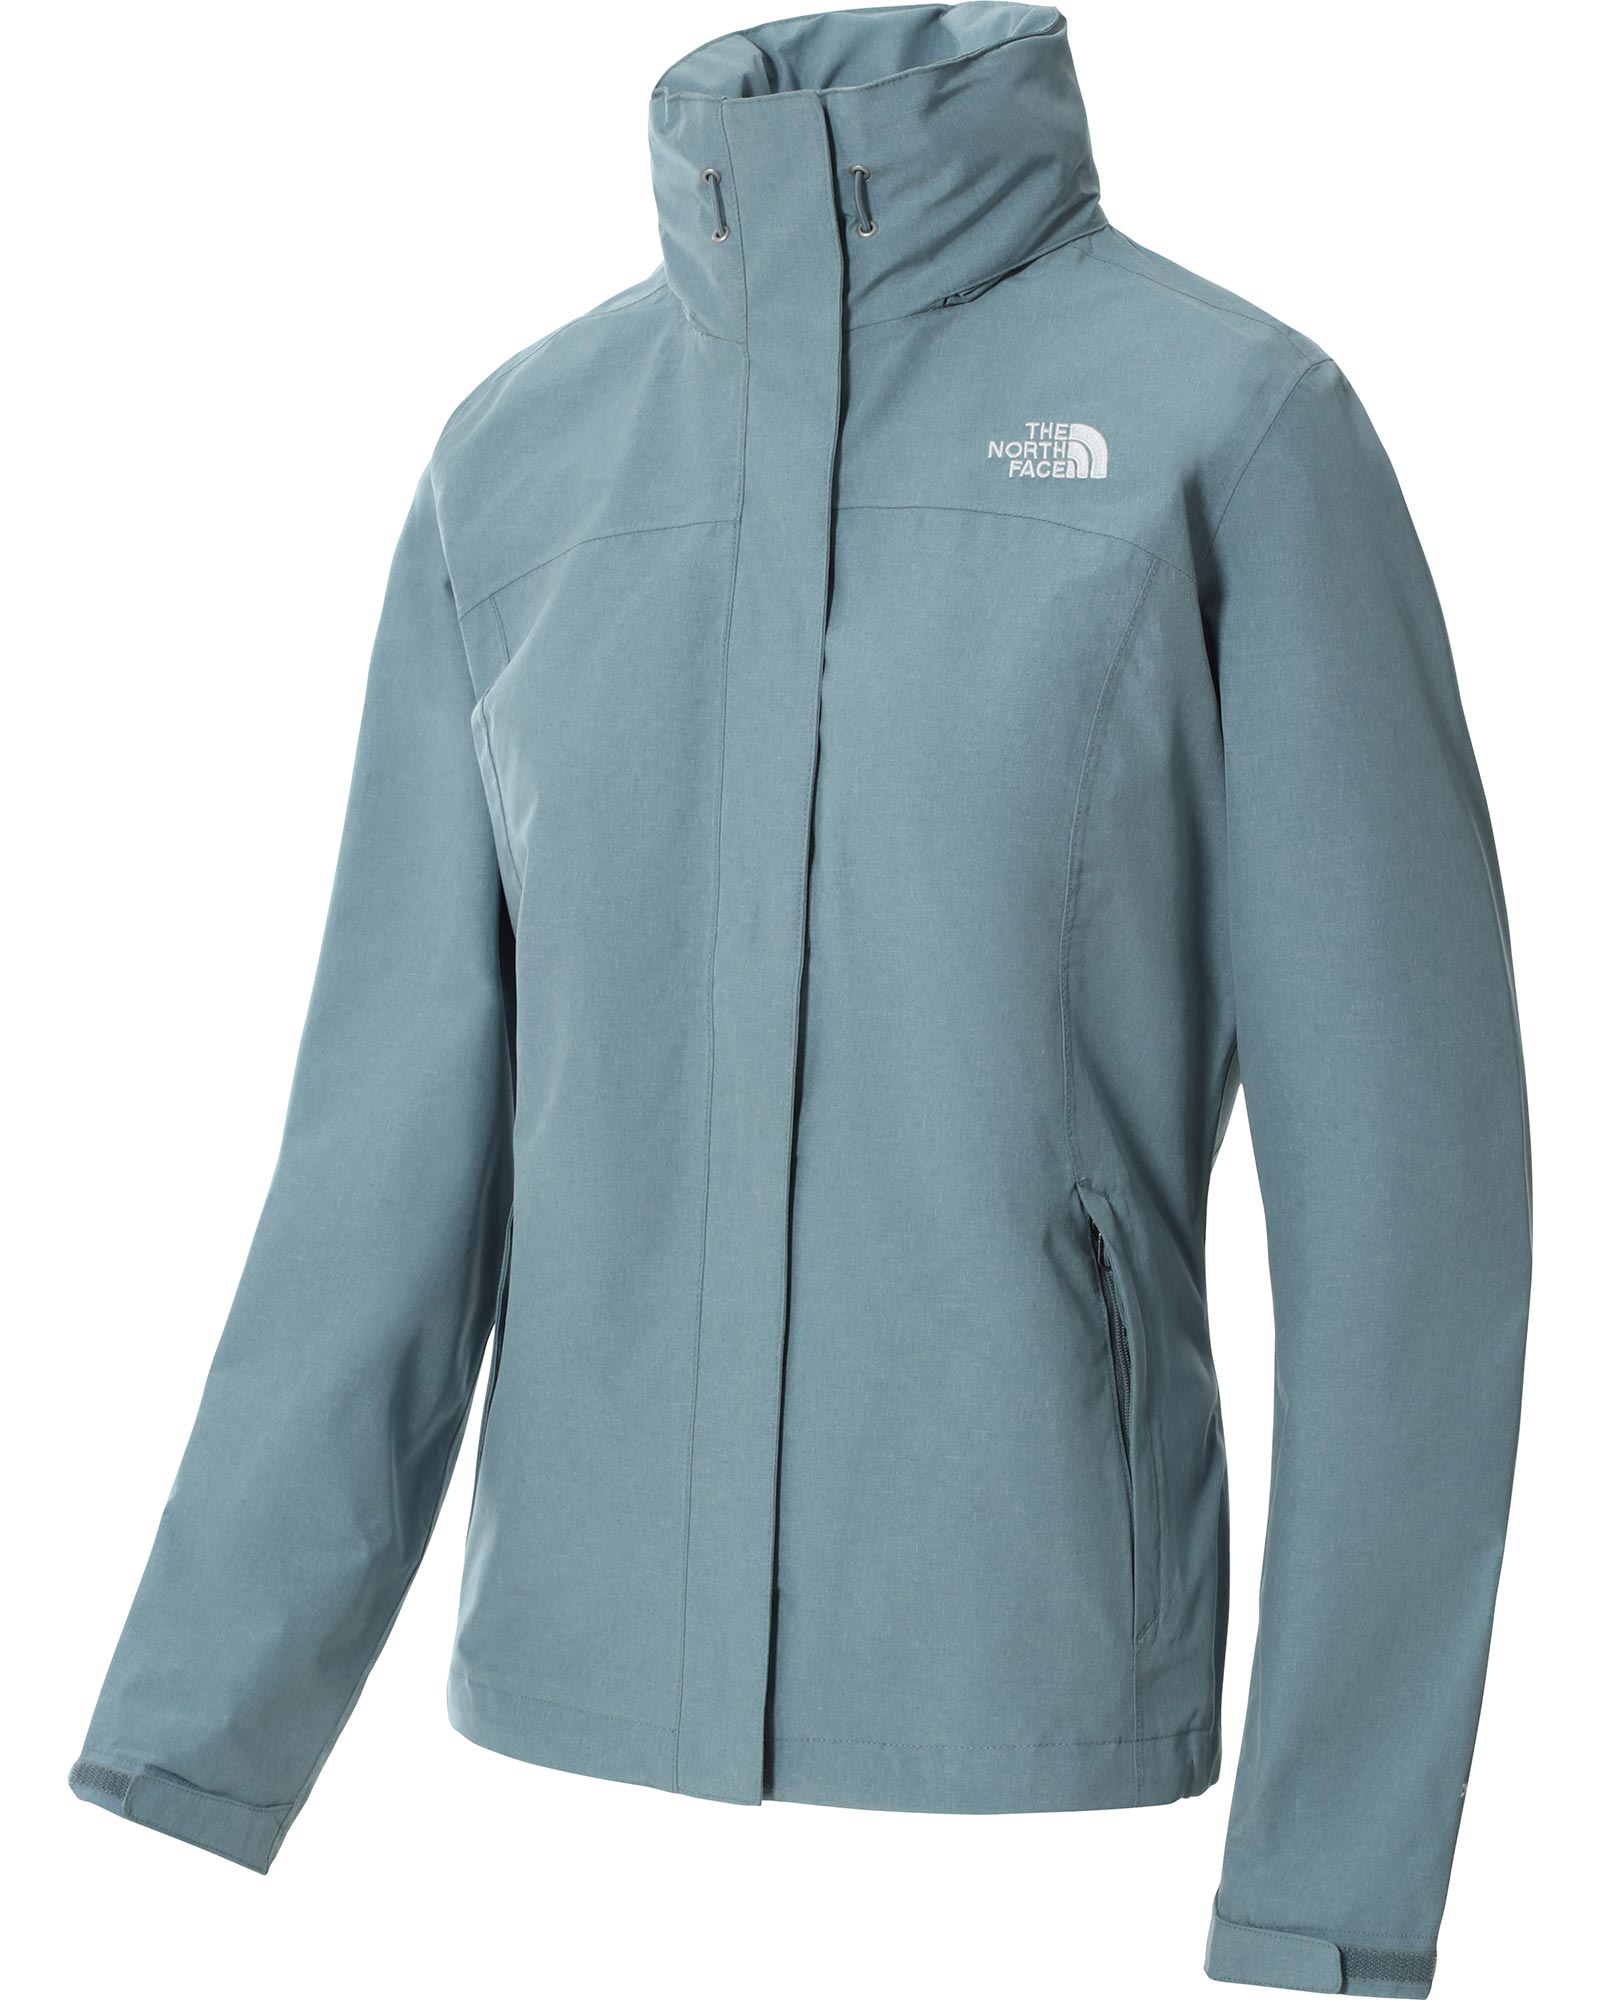 The North Face Sangro DryVent Women’s Jacket - Goblin Blue Heather XS